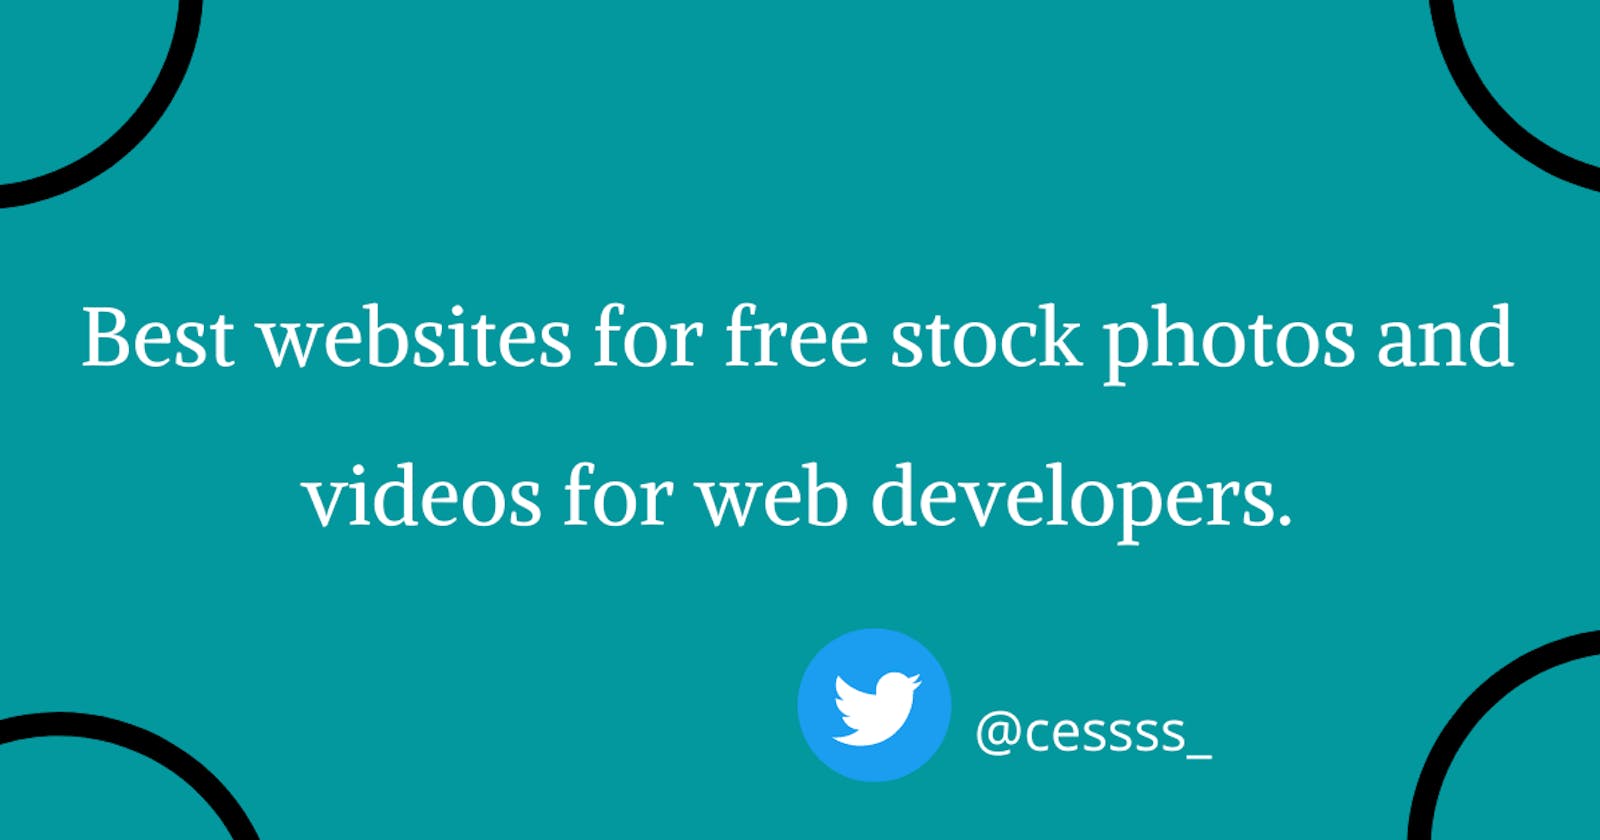 Best websites for free stock photos and videos for web developers.